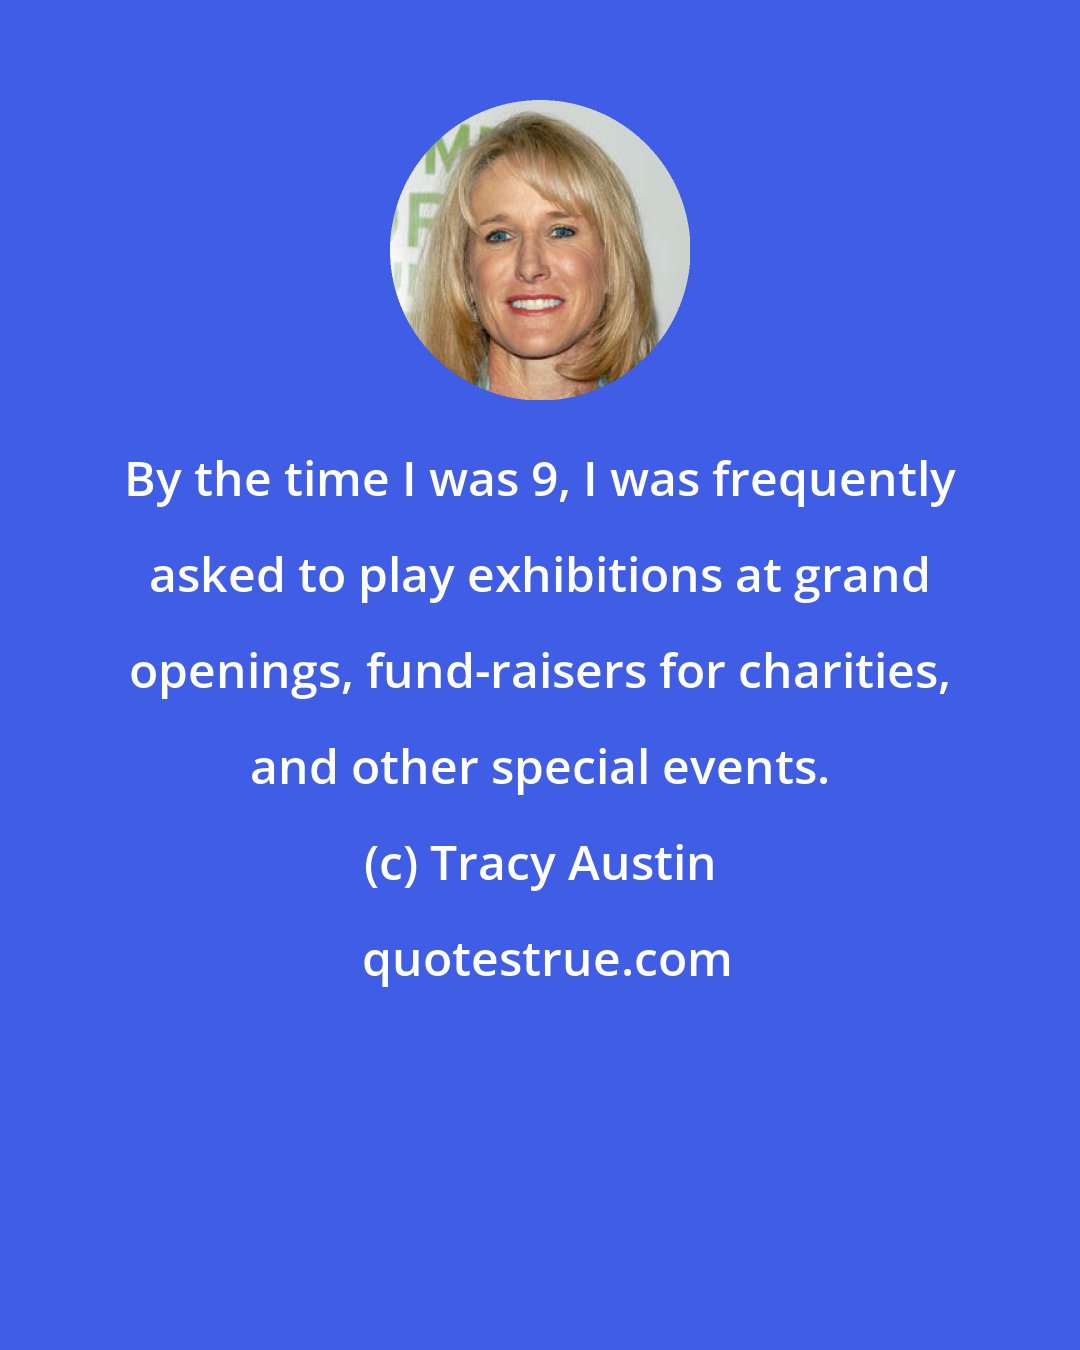 Tracy Austin: By the time I was 9, I was frequently asked to play exhibitions at grand openings, fund-raisers for charities, and other special events.